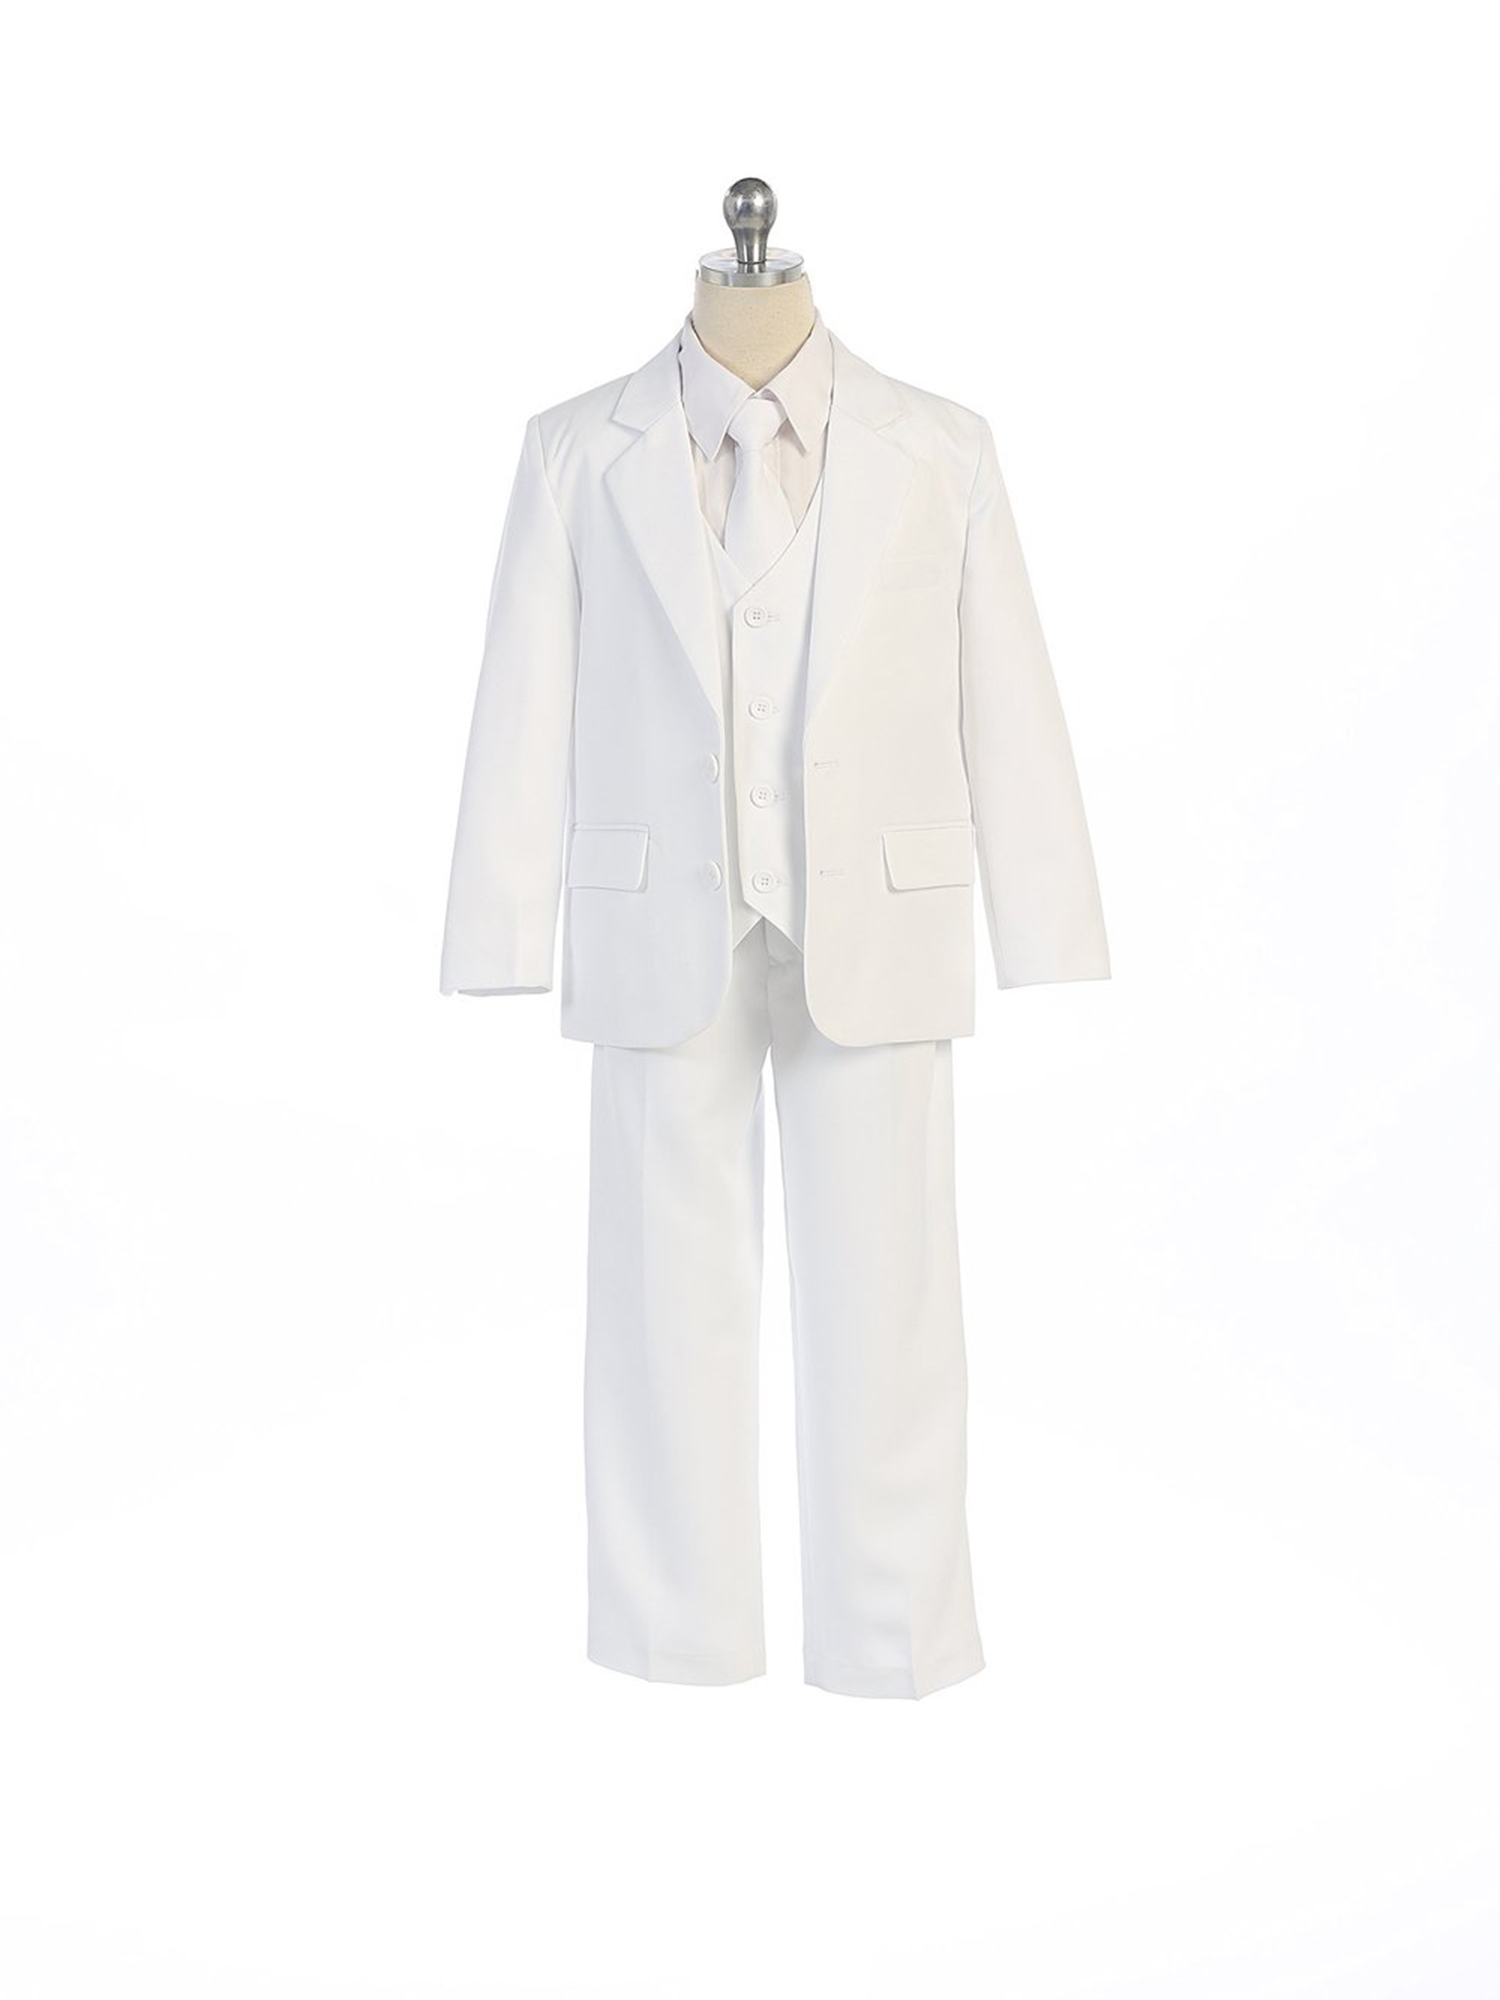 COLE Boys Suit with Shirt and Vest (5-Piece) - White - Size 7